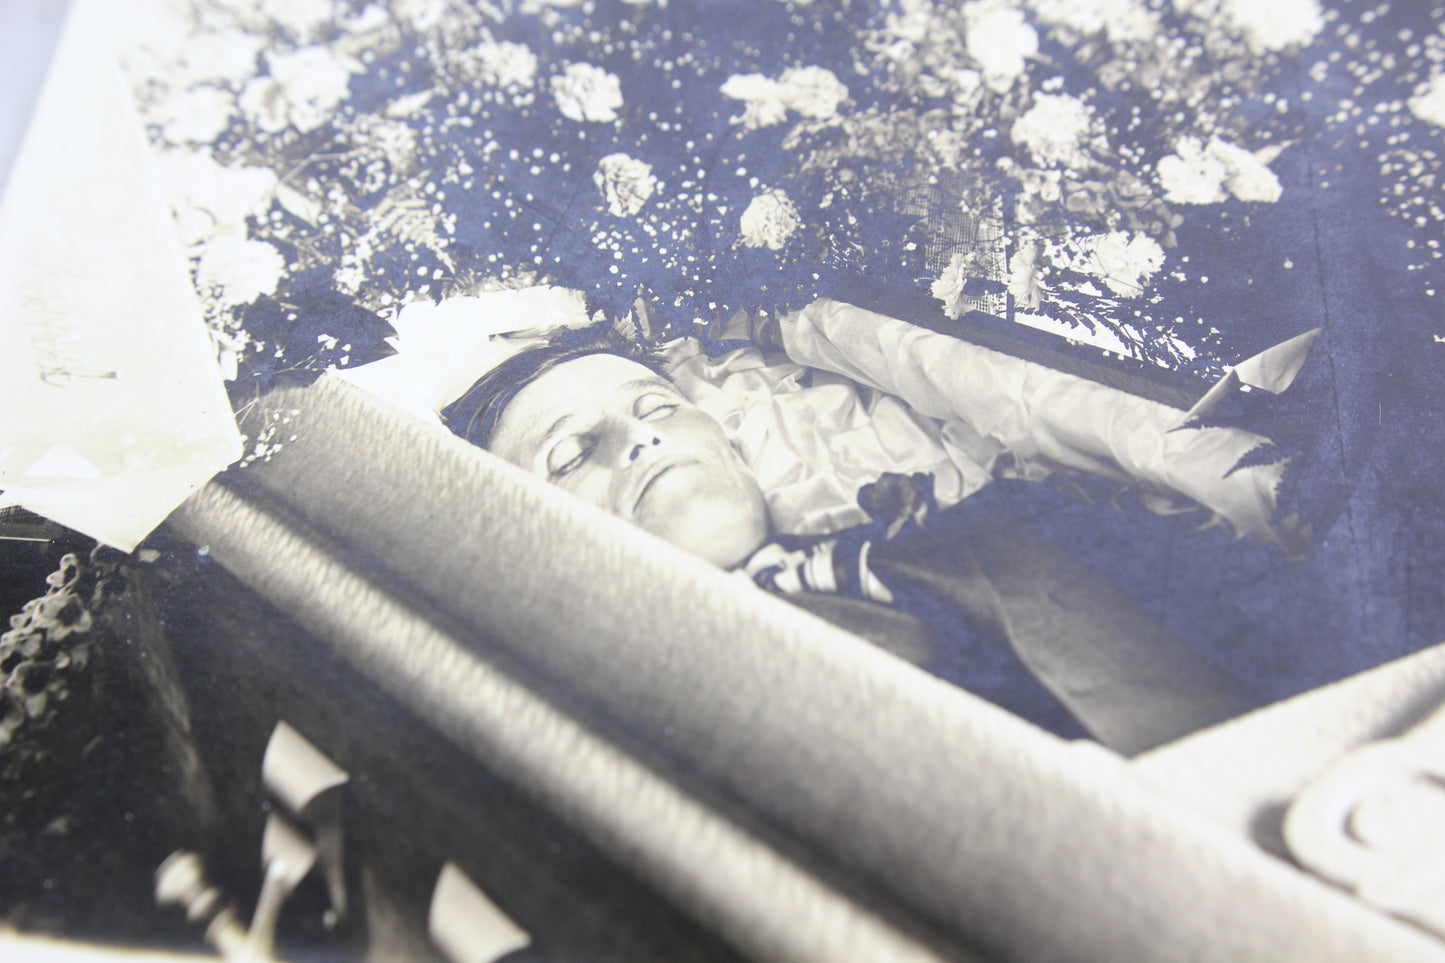 Postmortem Photograph of a Man in His Coffin Surrounded by Flowers